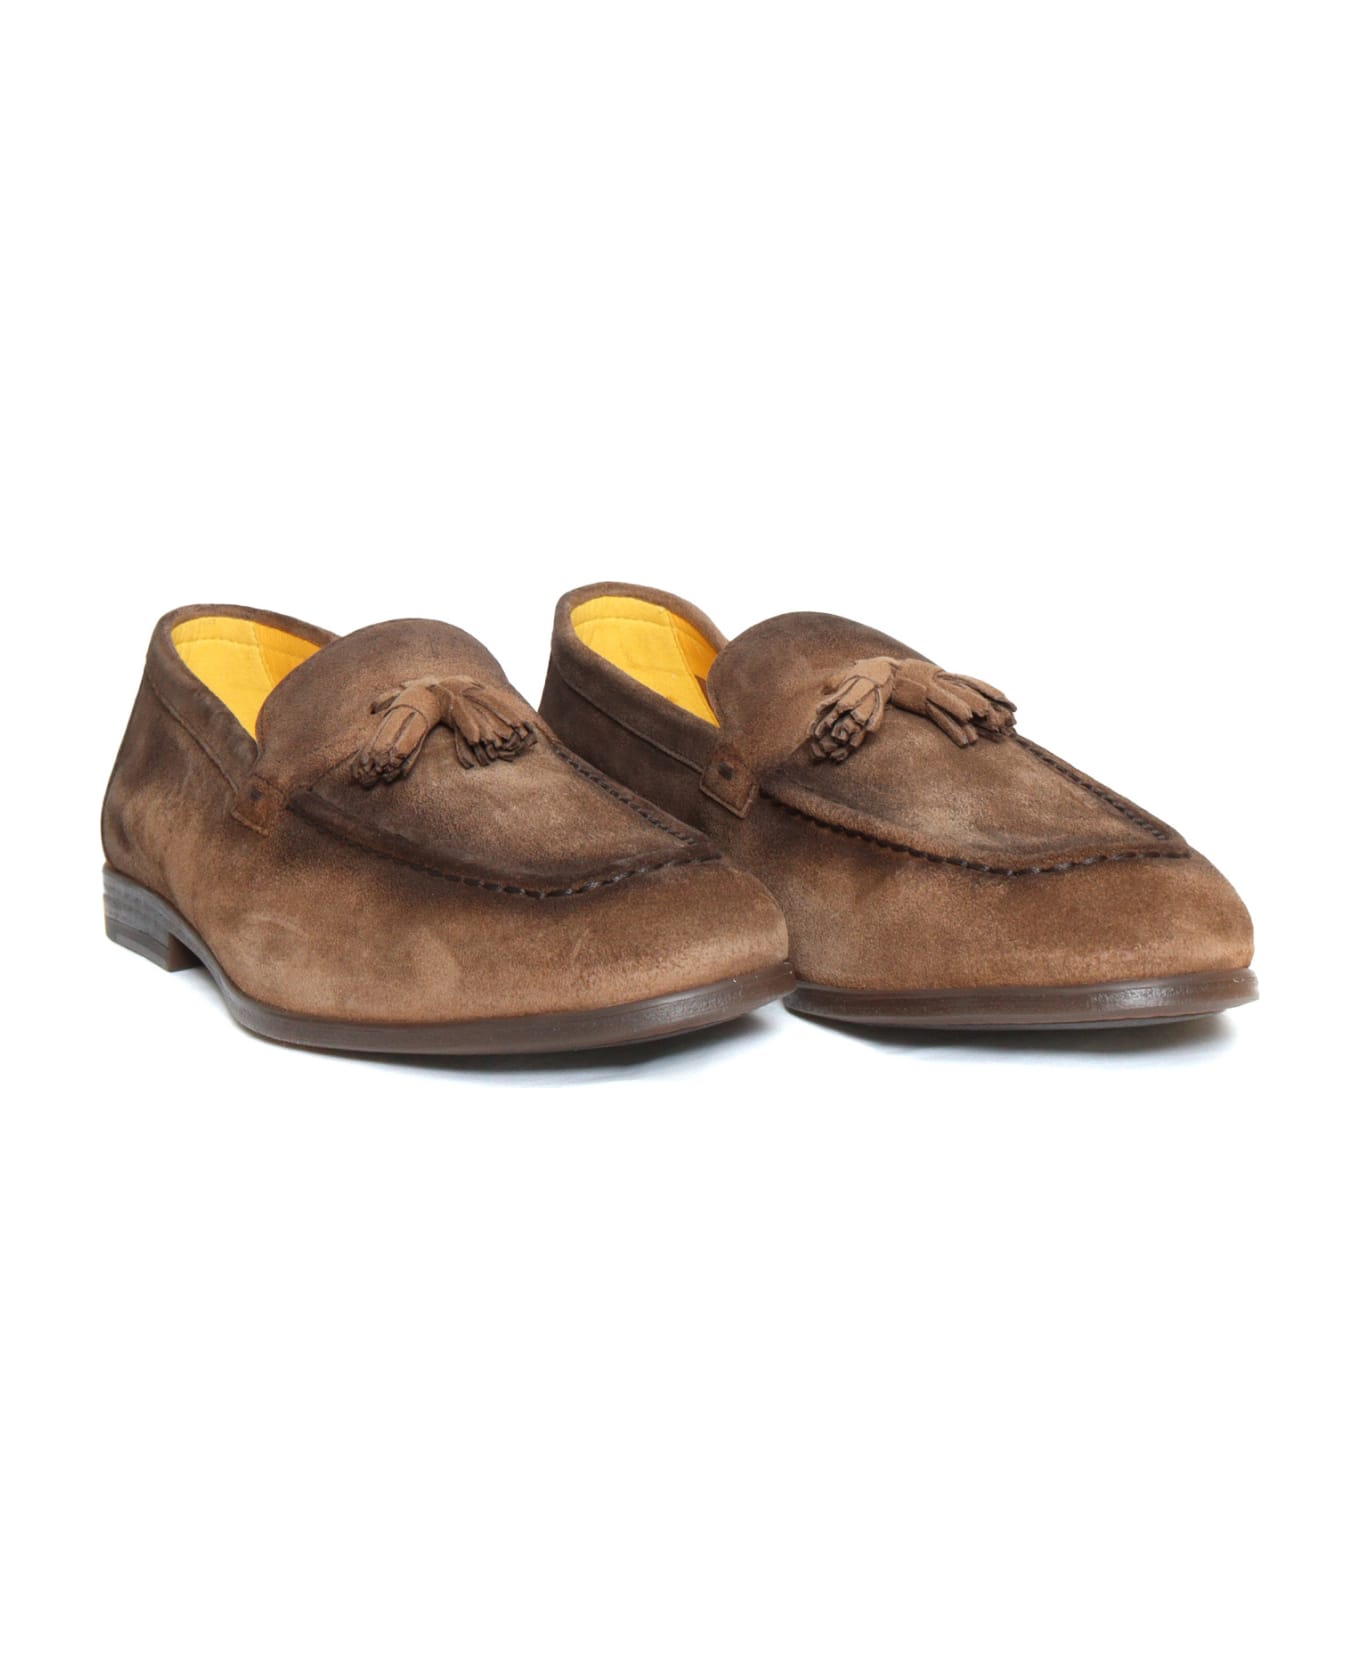 Doucal's Brown Suede Loafers - BROWN